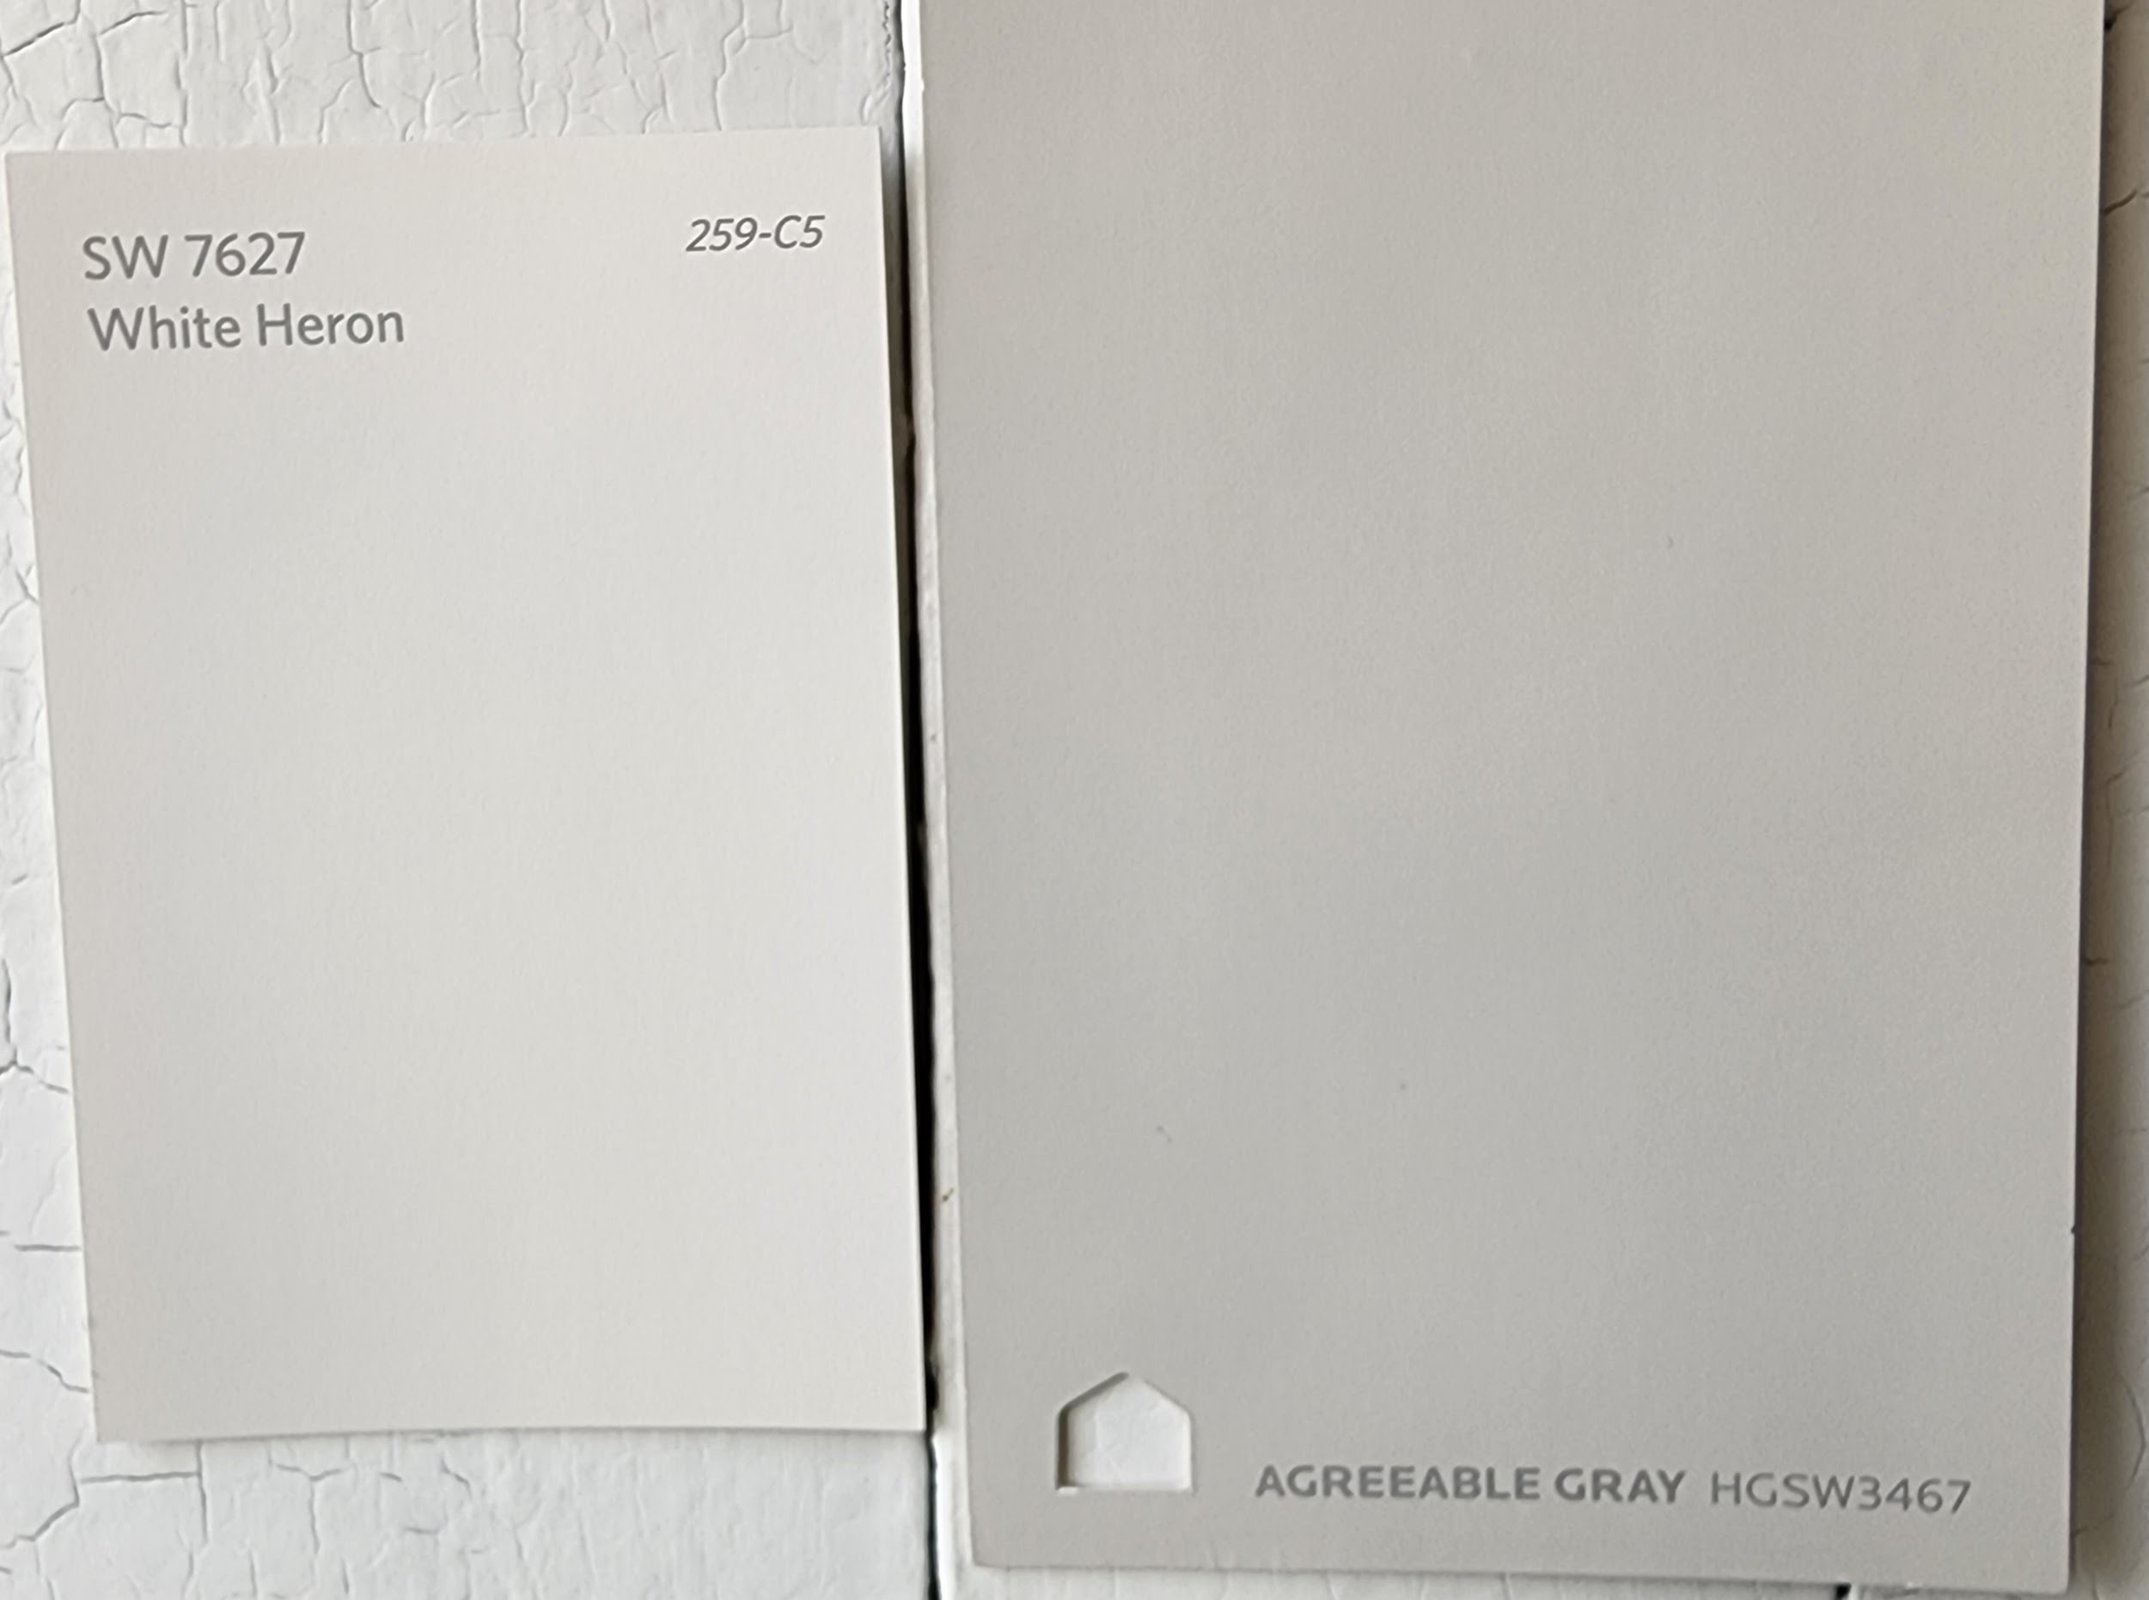  White Heron vs Agreeable Gray by Sherwin Williams